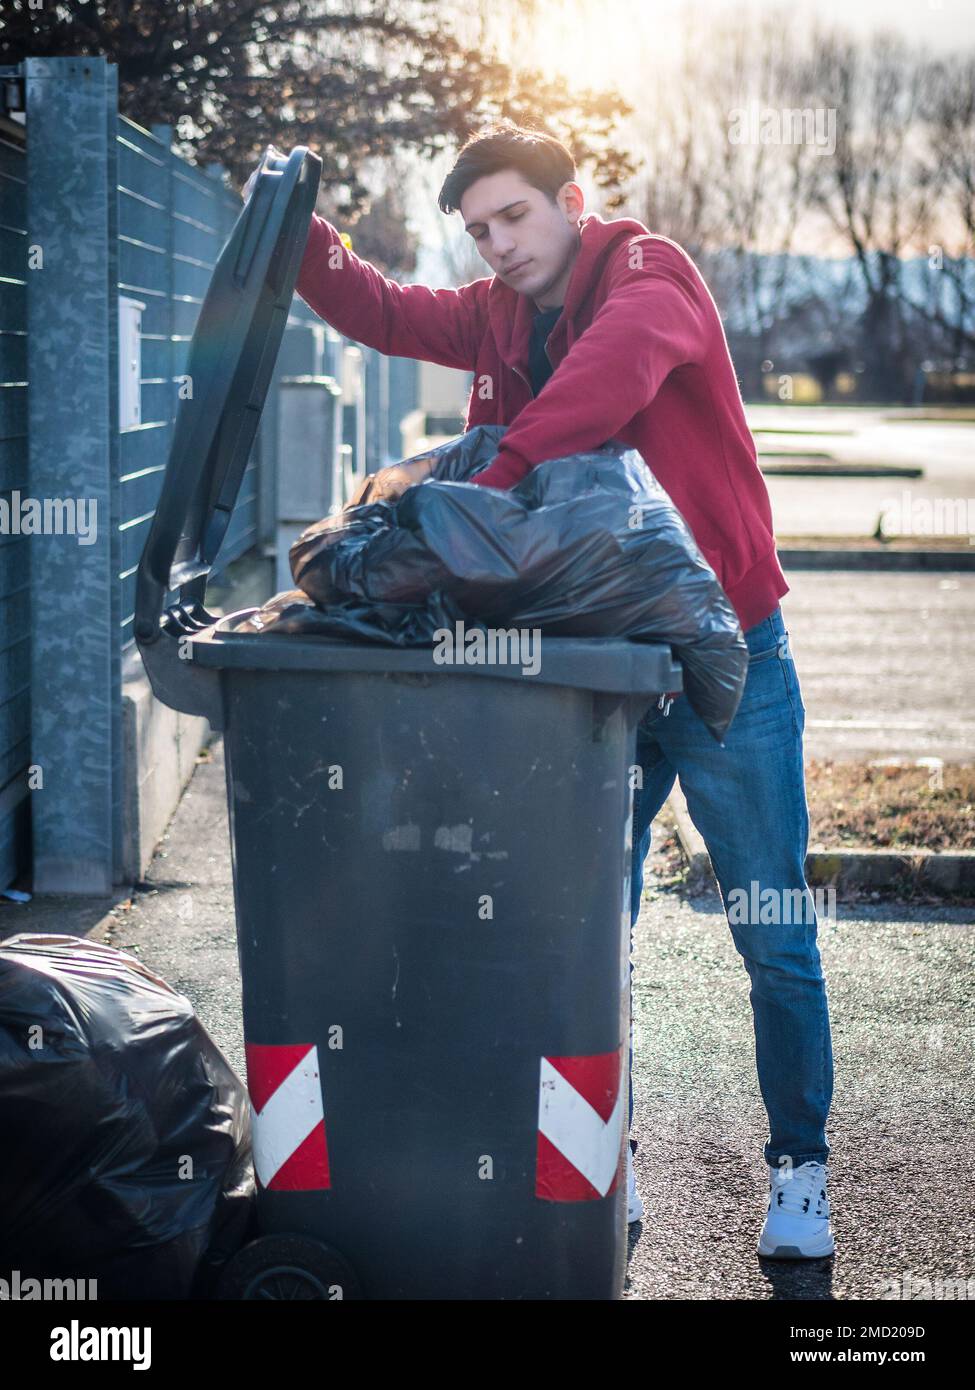 Attractive young man putting out rubbish standing Stock Photo